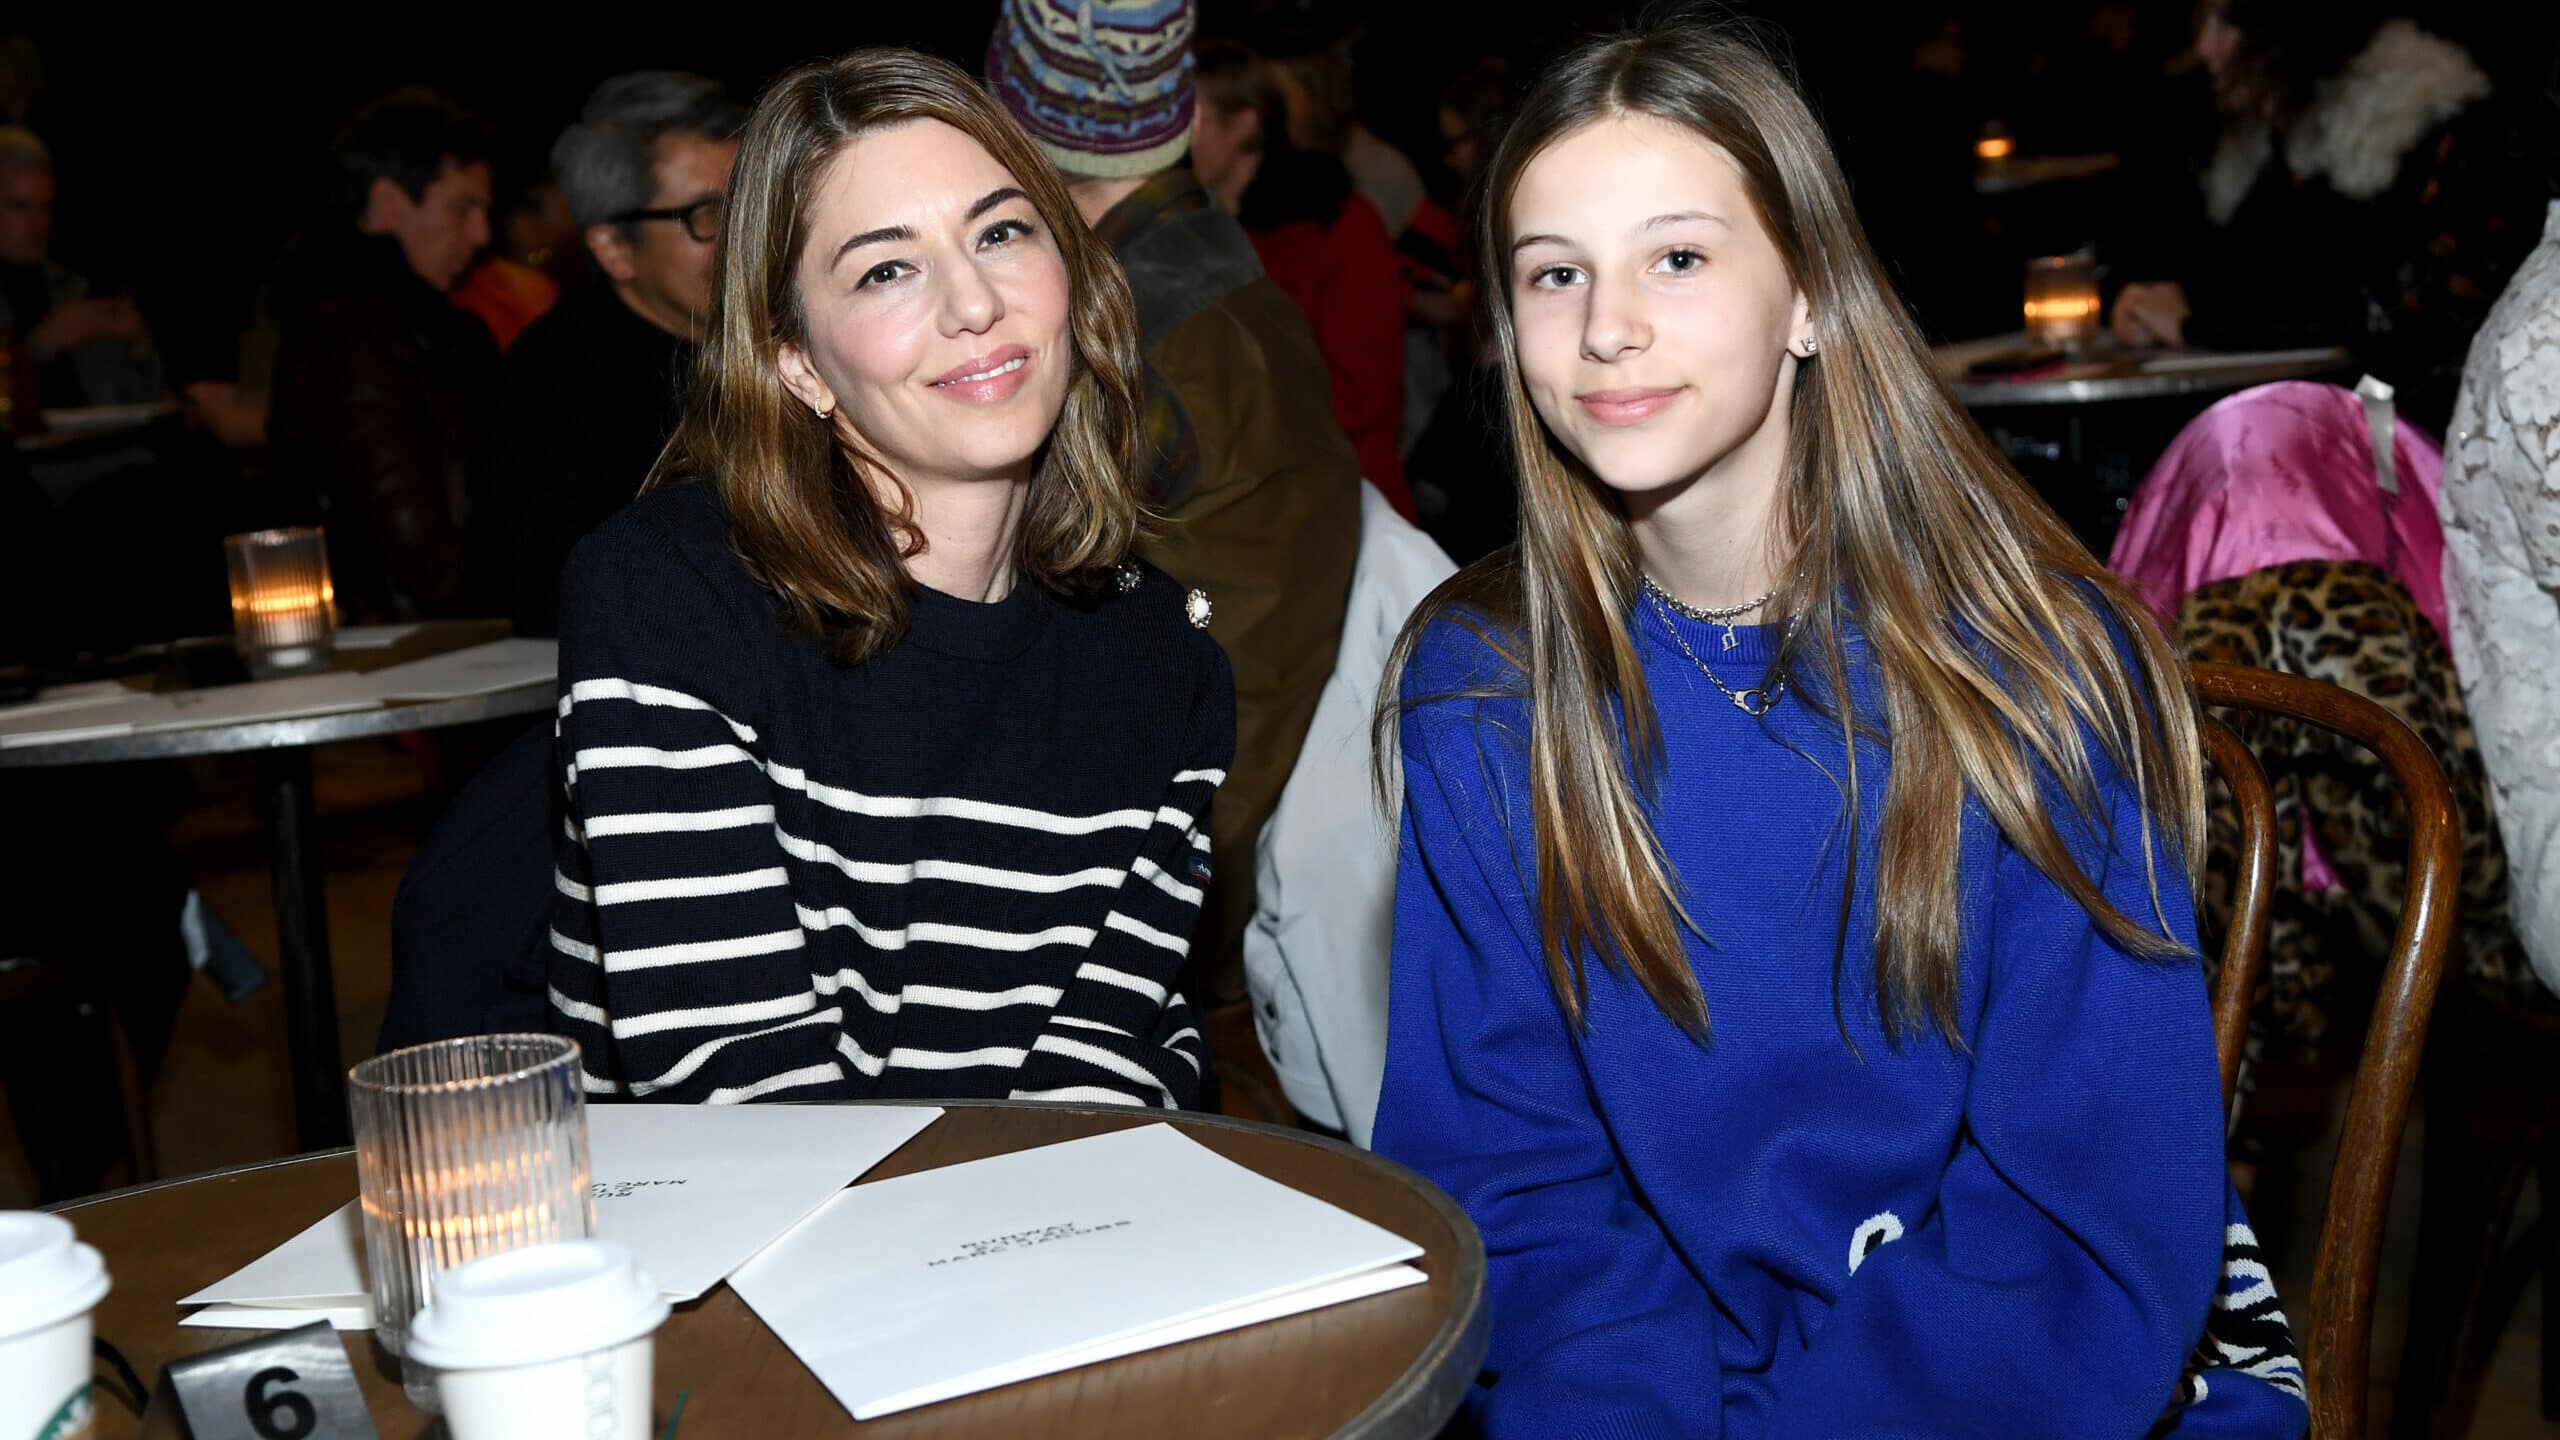 NEW YORK, NEW YORK - FEBRUARY 12: Sofia Coppola and Romy Mars attend the Marc Jacobs Fall 2020 runway show during New York Fashion Week on February 12, 2020 in New York City.